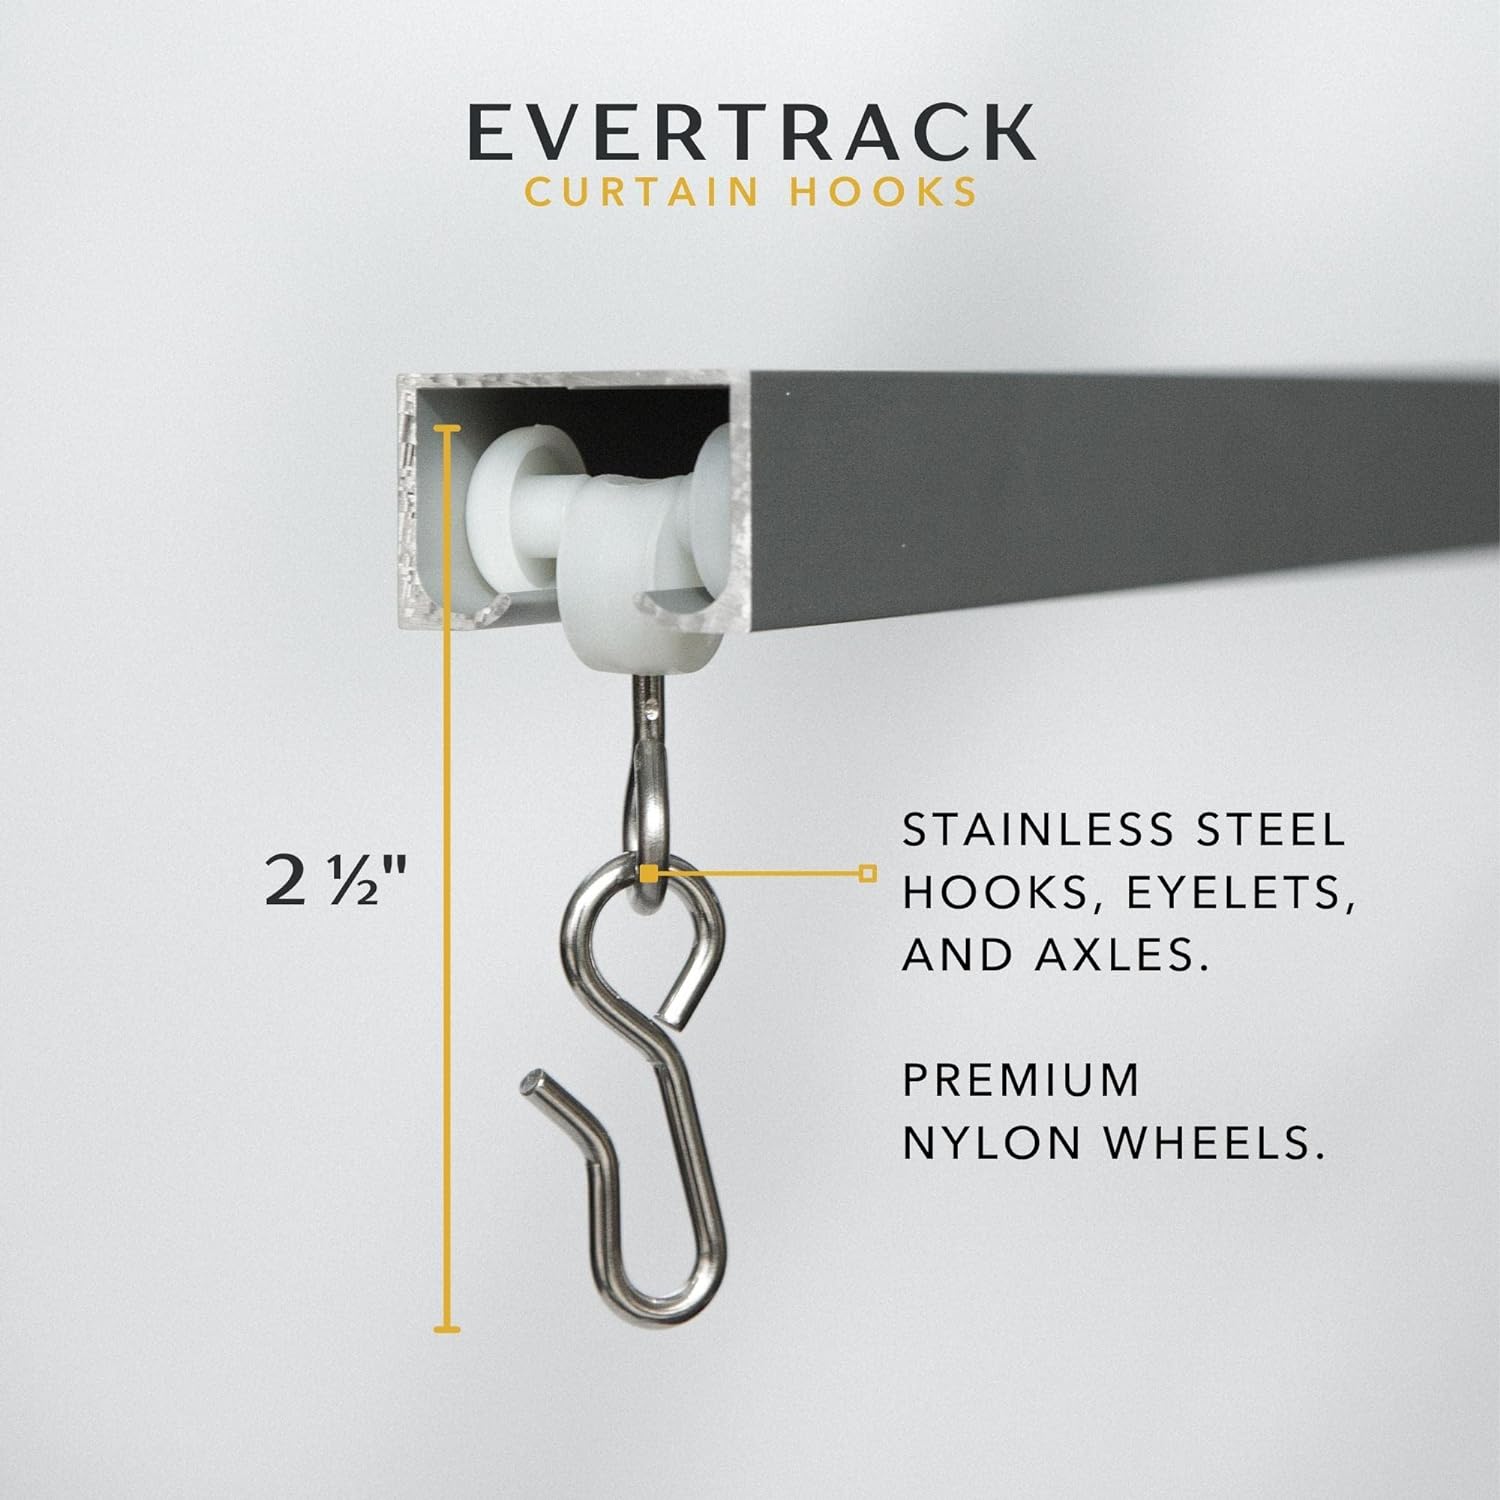 EverTrack Curtain Hooks - Roller Carriers for Ceiling Mounted Curtain Track with Hooks for Curtains, Drapes, and Room Dividers - Pack of